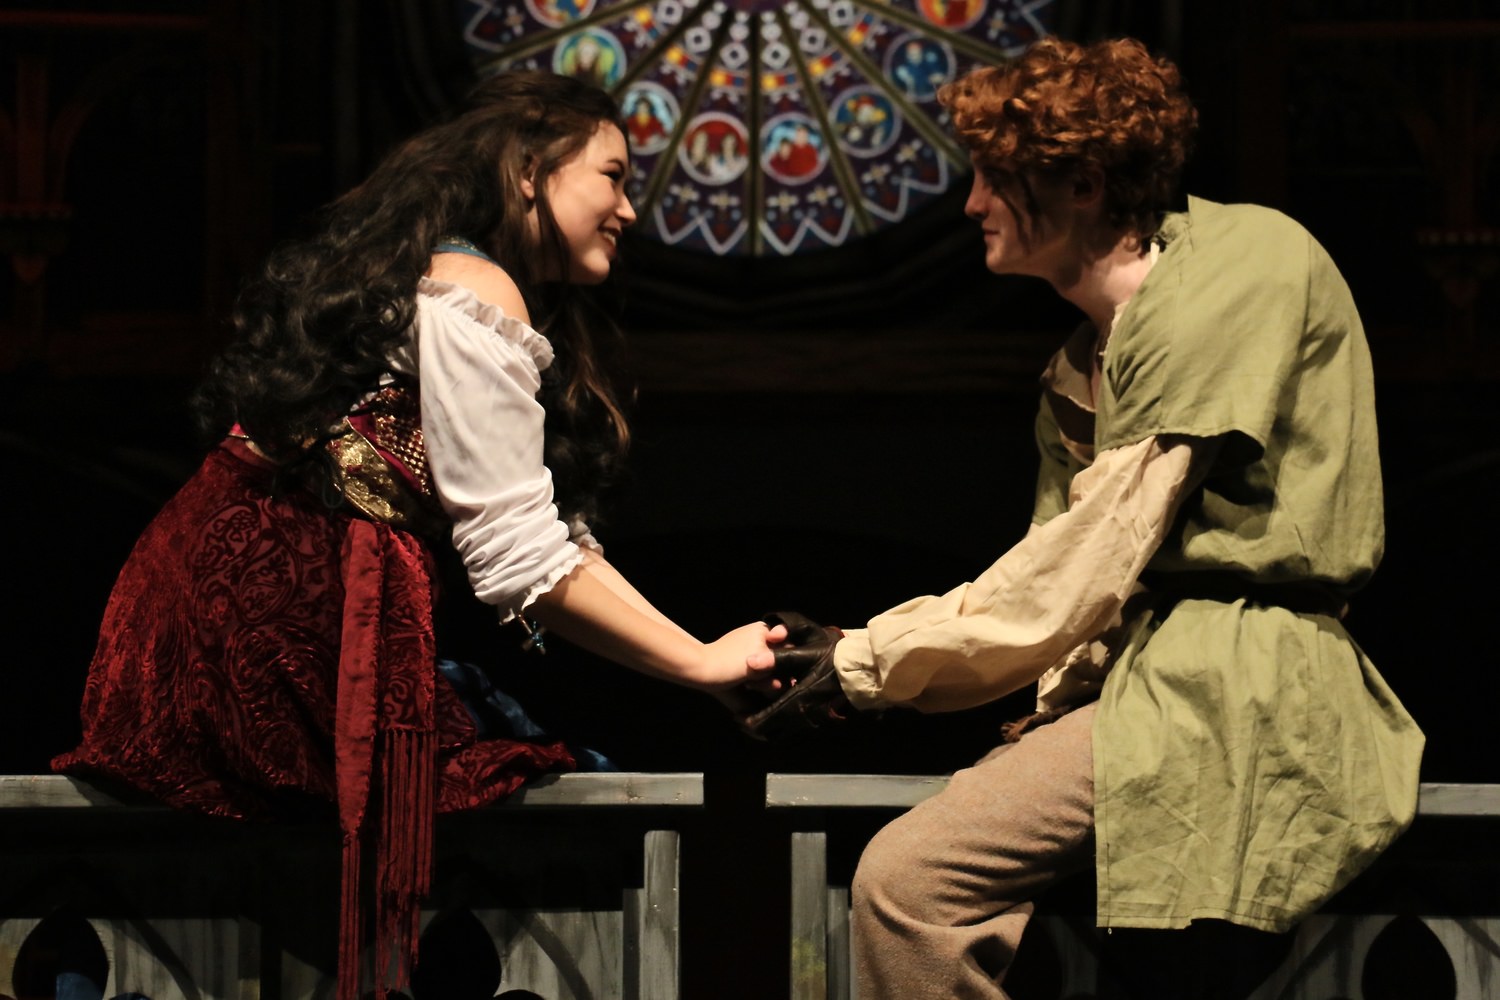 Hartland High School's 2018 Production of The Hunchback of Notre Dame sold out all 6 shows of this amazing story. 2